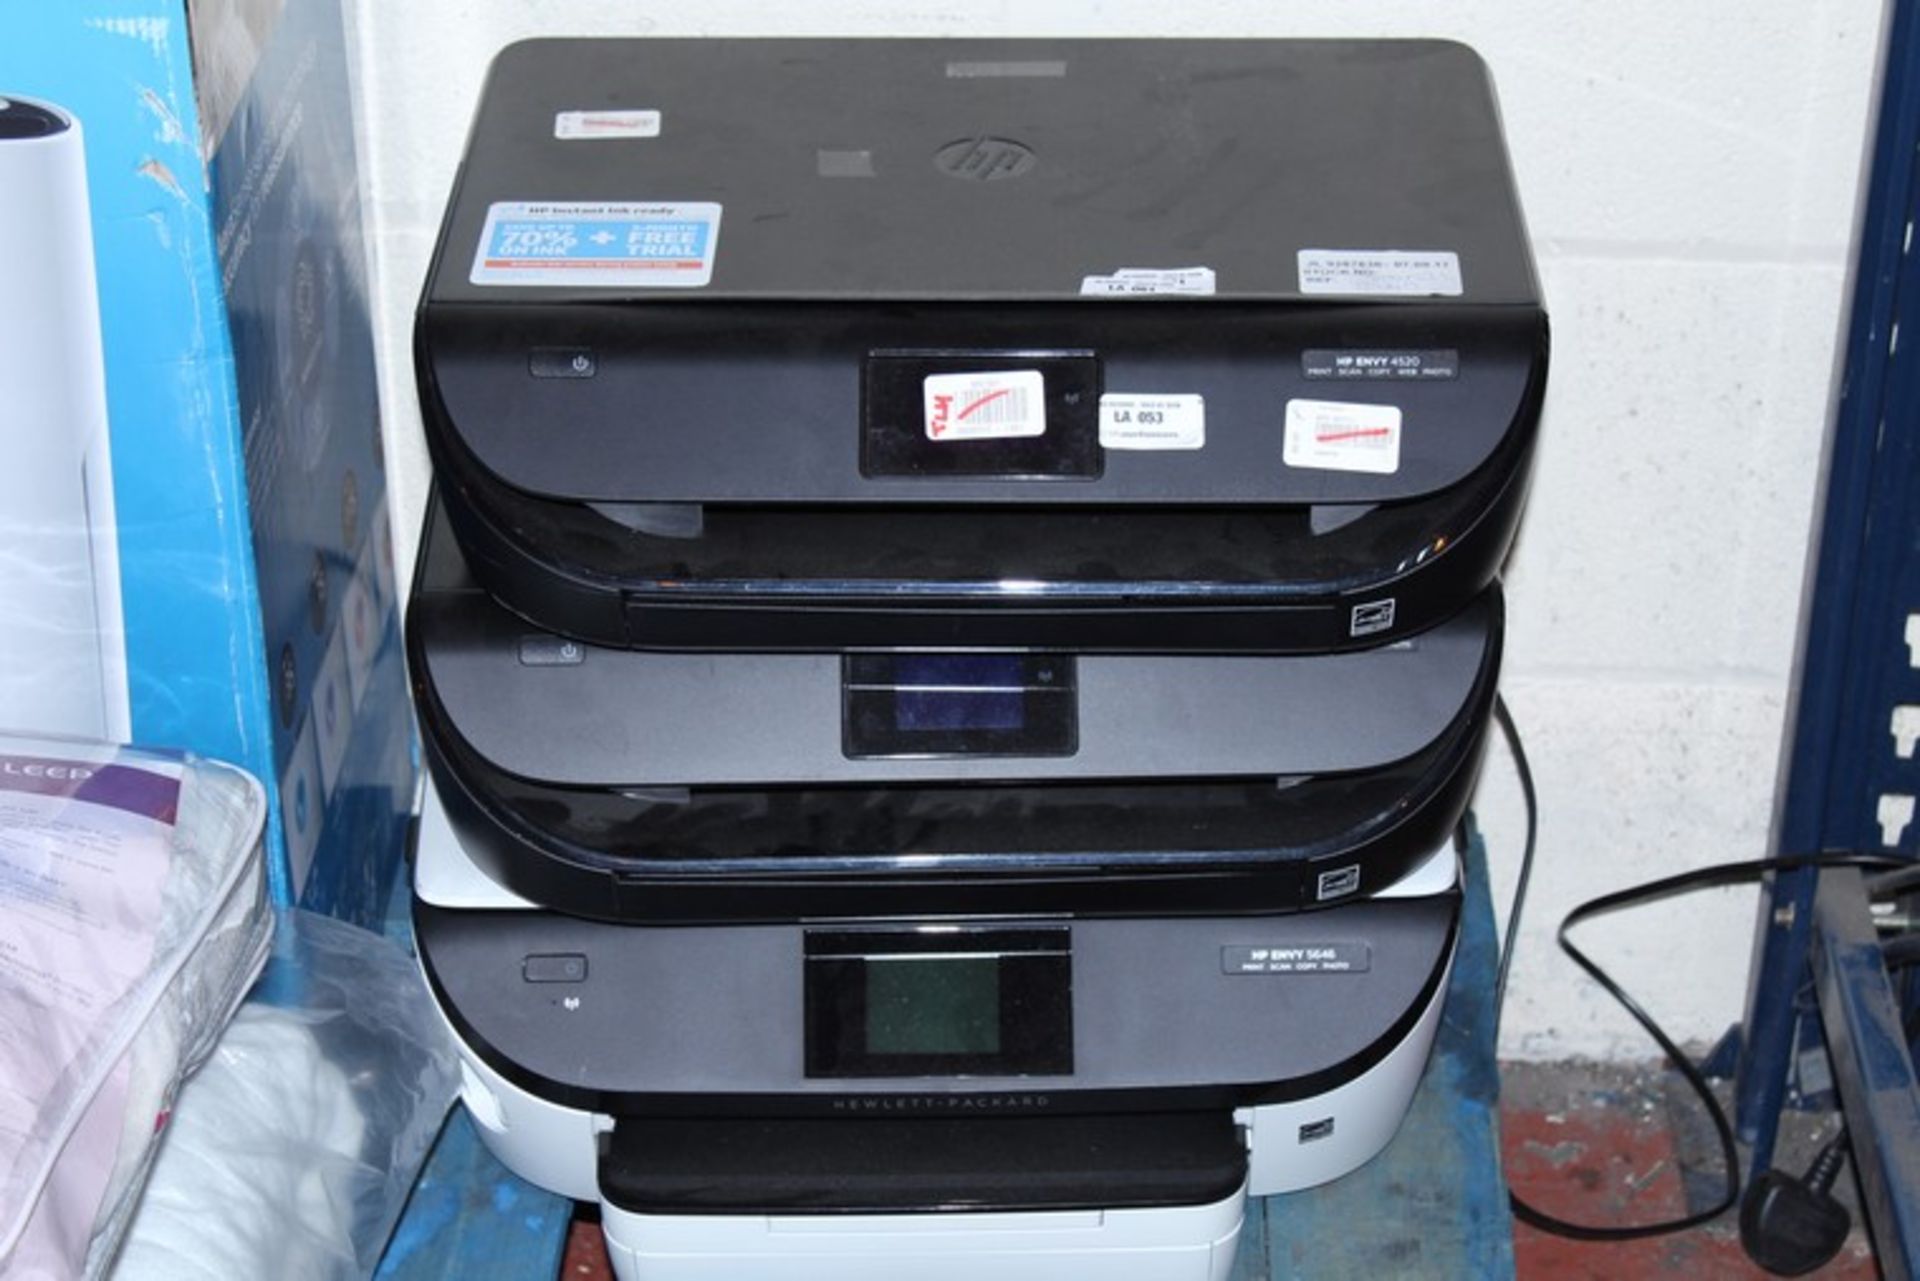 3 x ASSORTED HP PRINTERS RRP £40 EACH (07.09.17) *PLEASE NOTE THAT THE BID PRICE IS MULTIPLIED BY